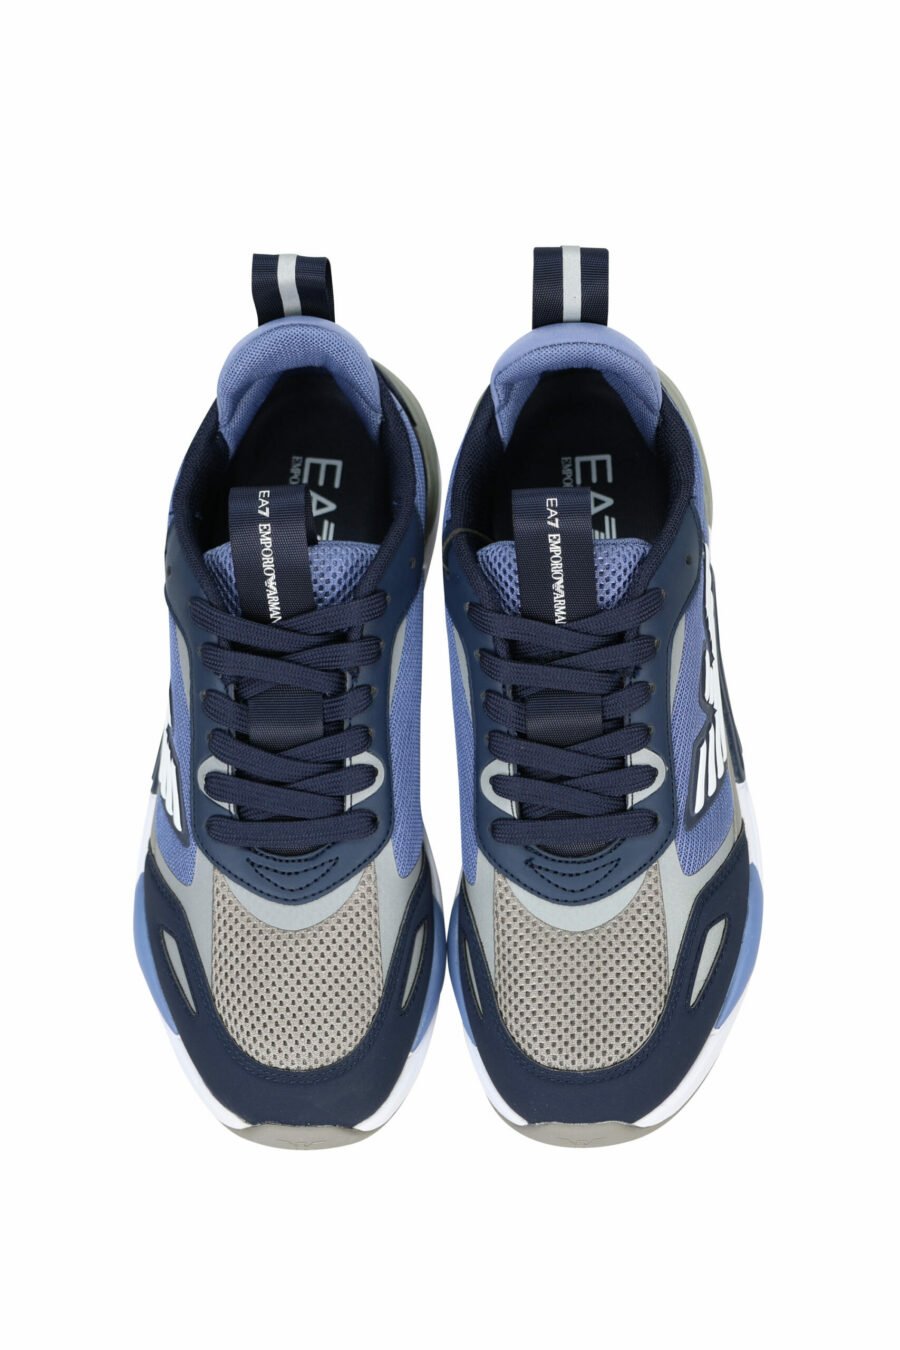 Trainers black with blue and grey with white eagle logo - 8056787461604 4 scaled